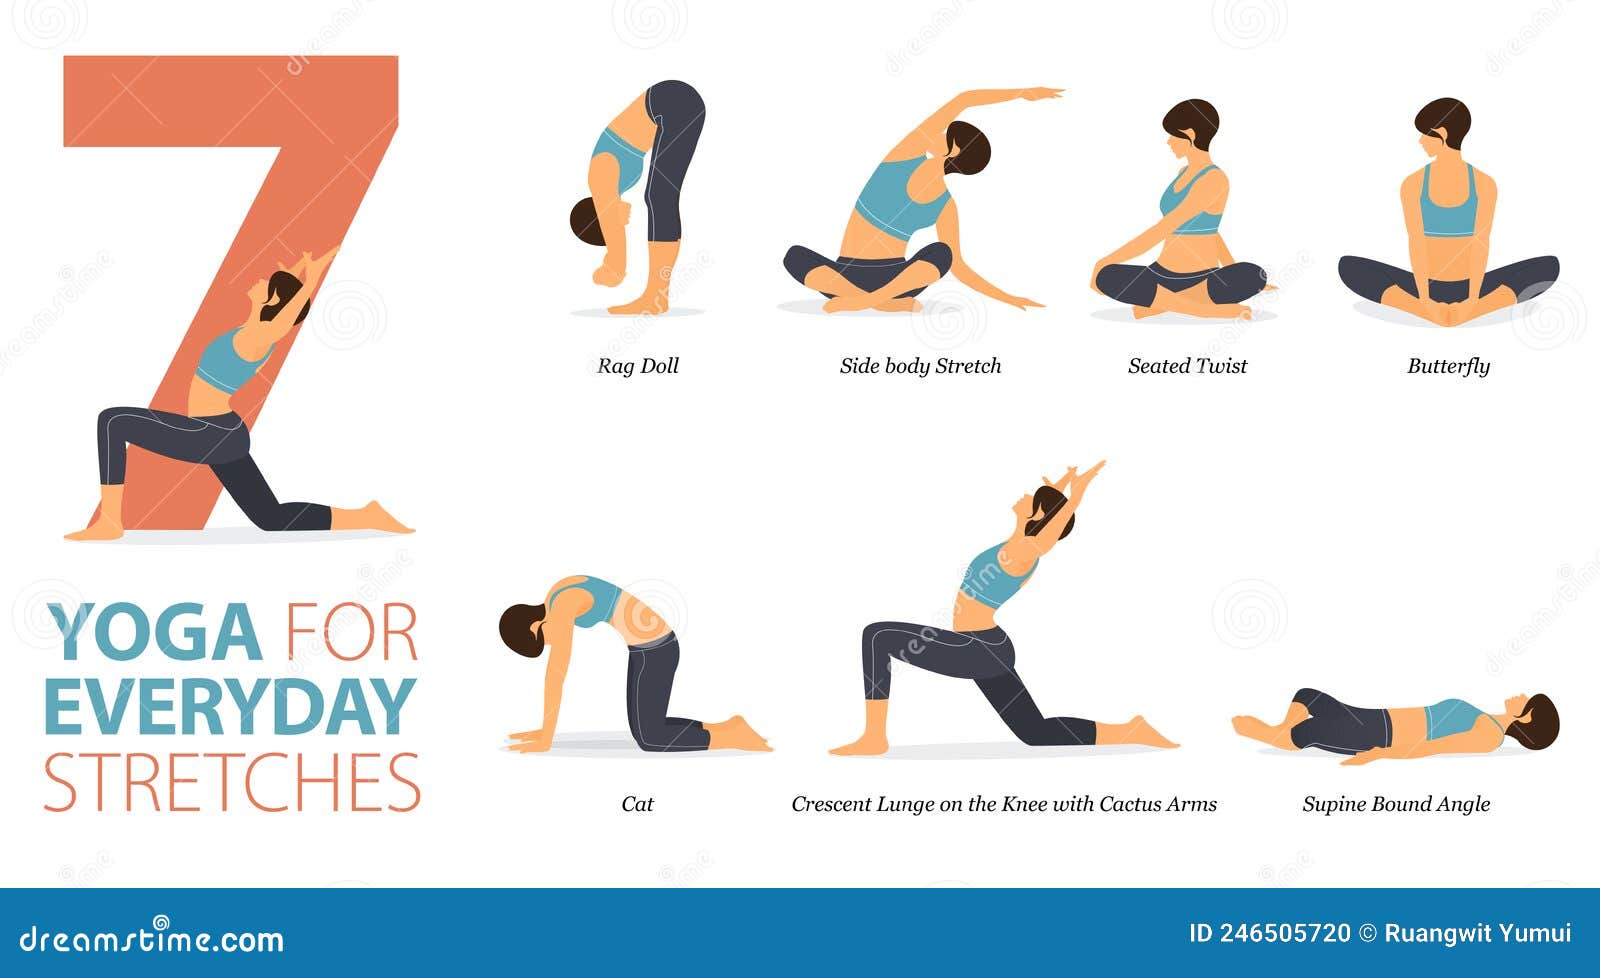 7 Yoga Poses or Asana Posture for Workout in Everyday Stretches